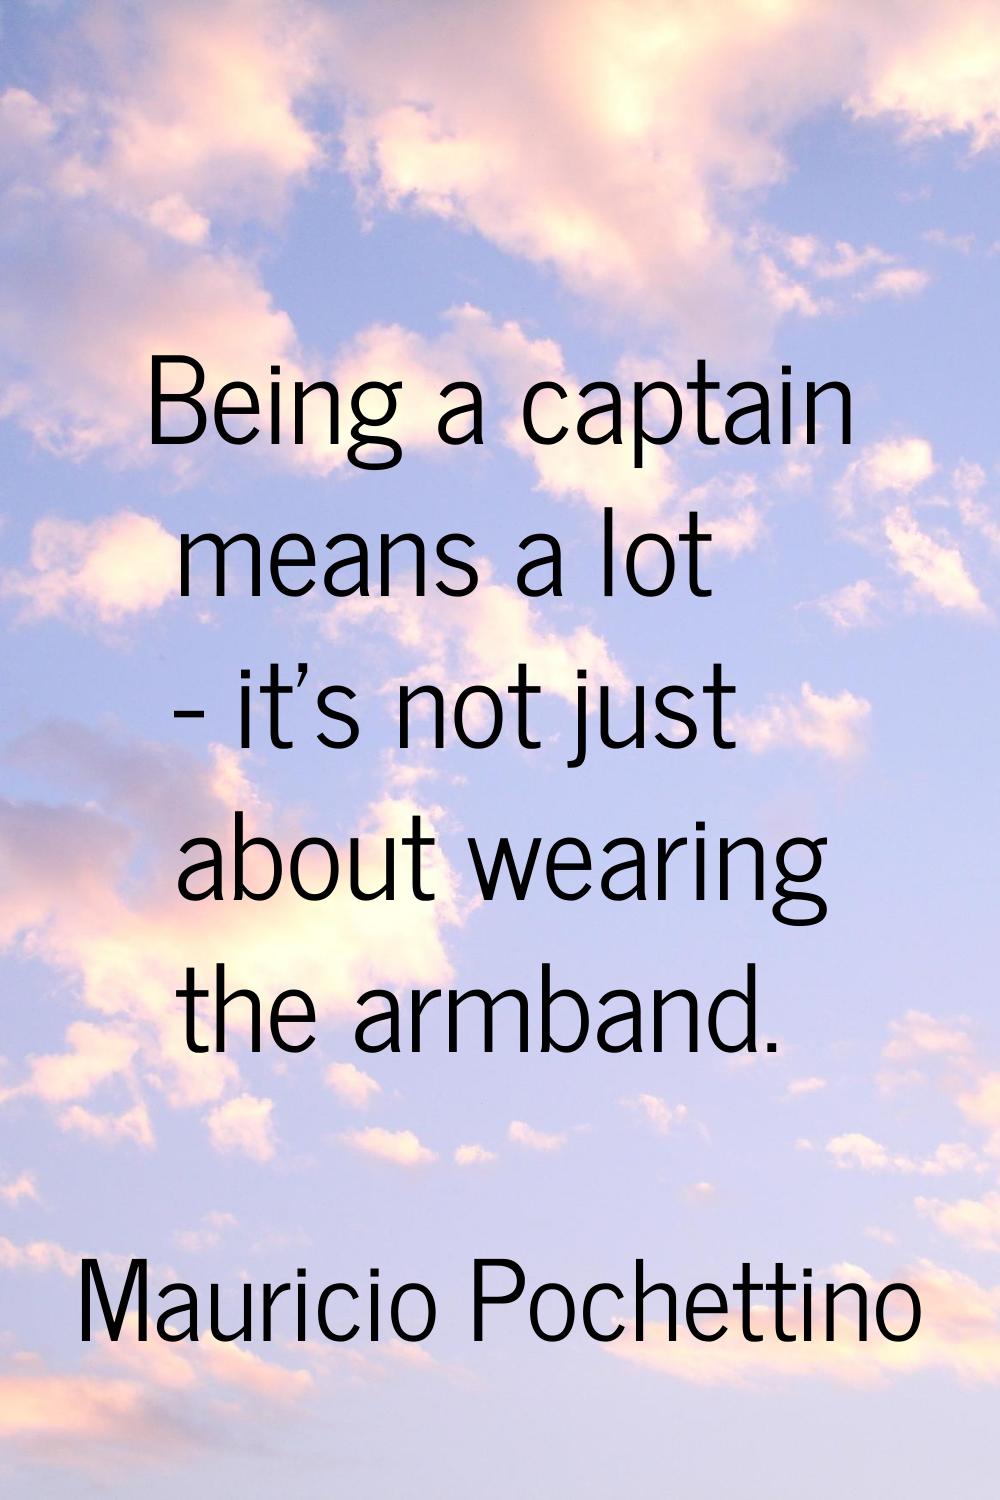 Being a captain means a lot - it's not just about wearing the armband.